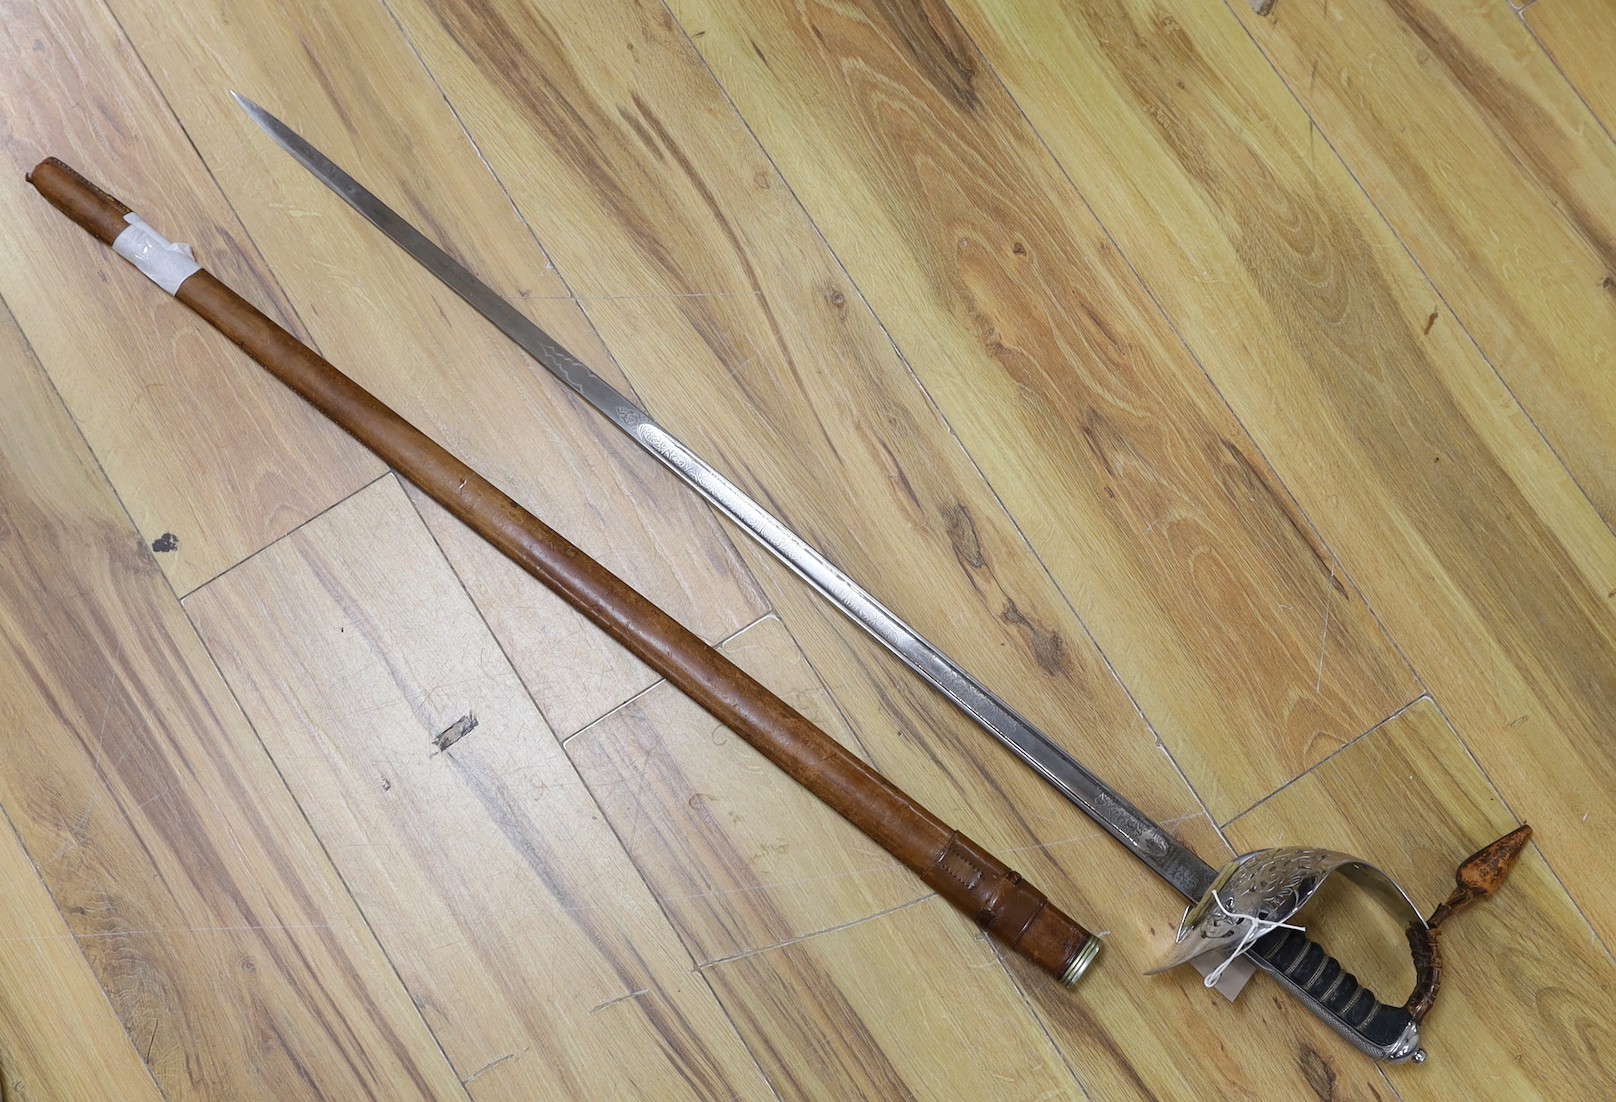 A Wilkinson George V officer's dress sword, stamped 1930 with broad arrow